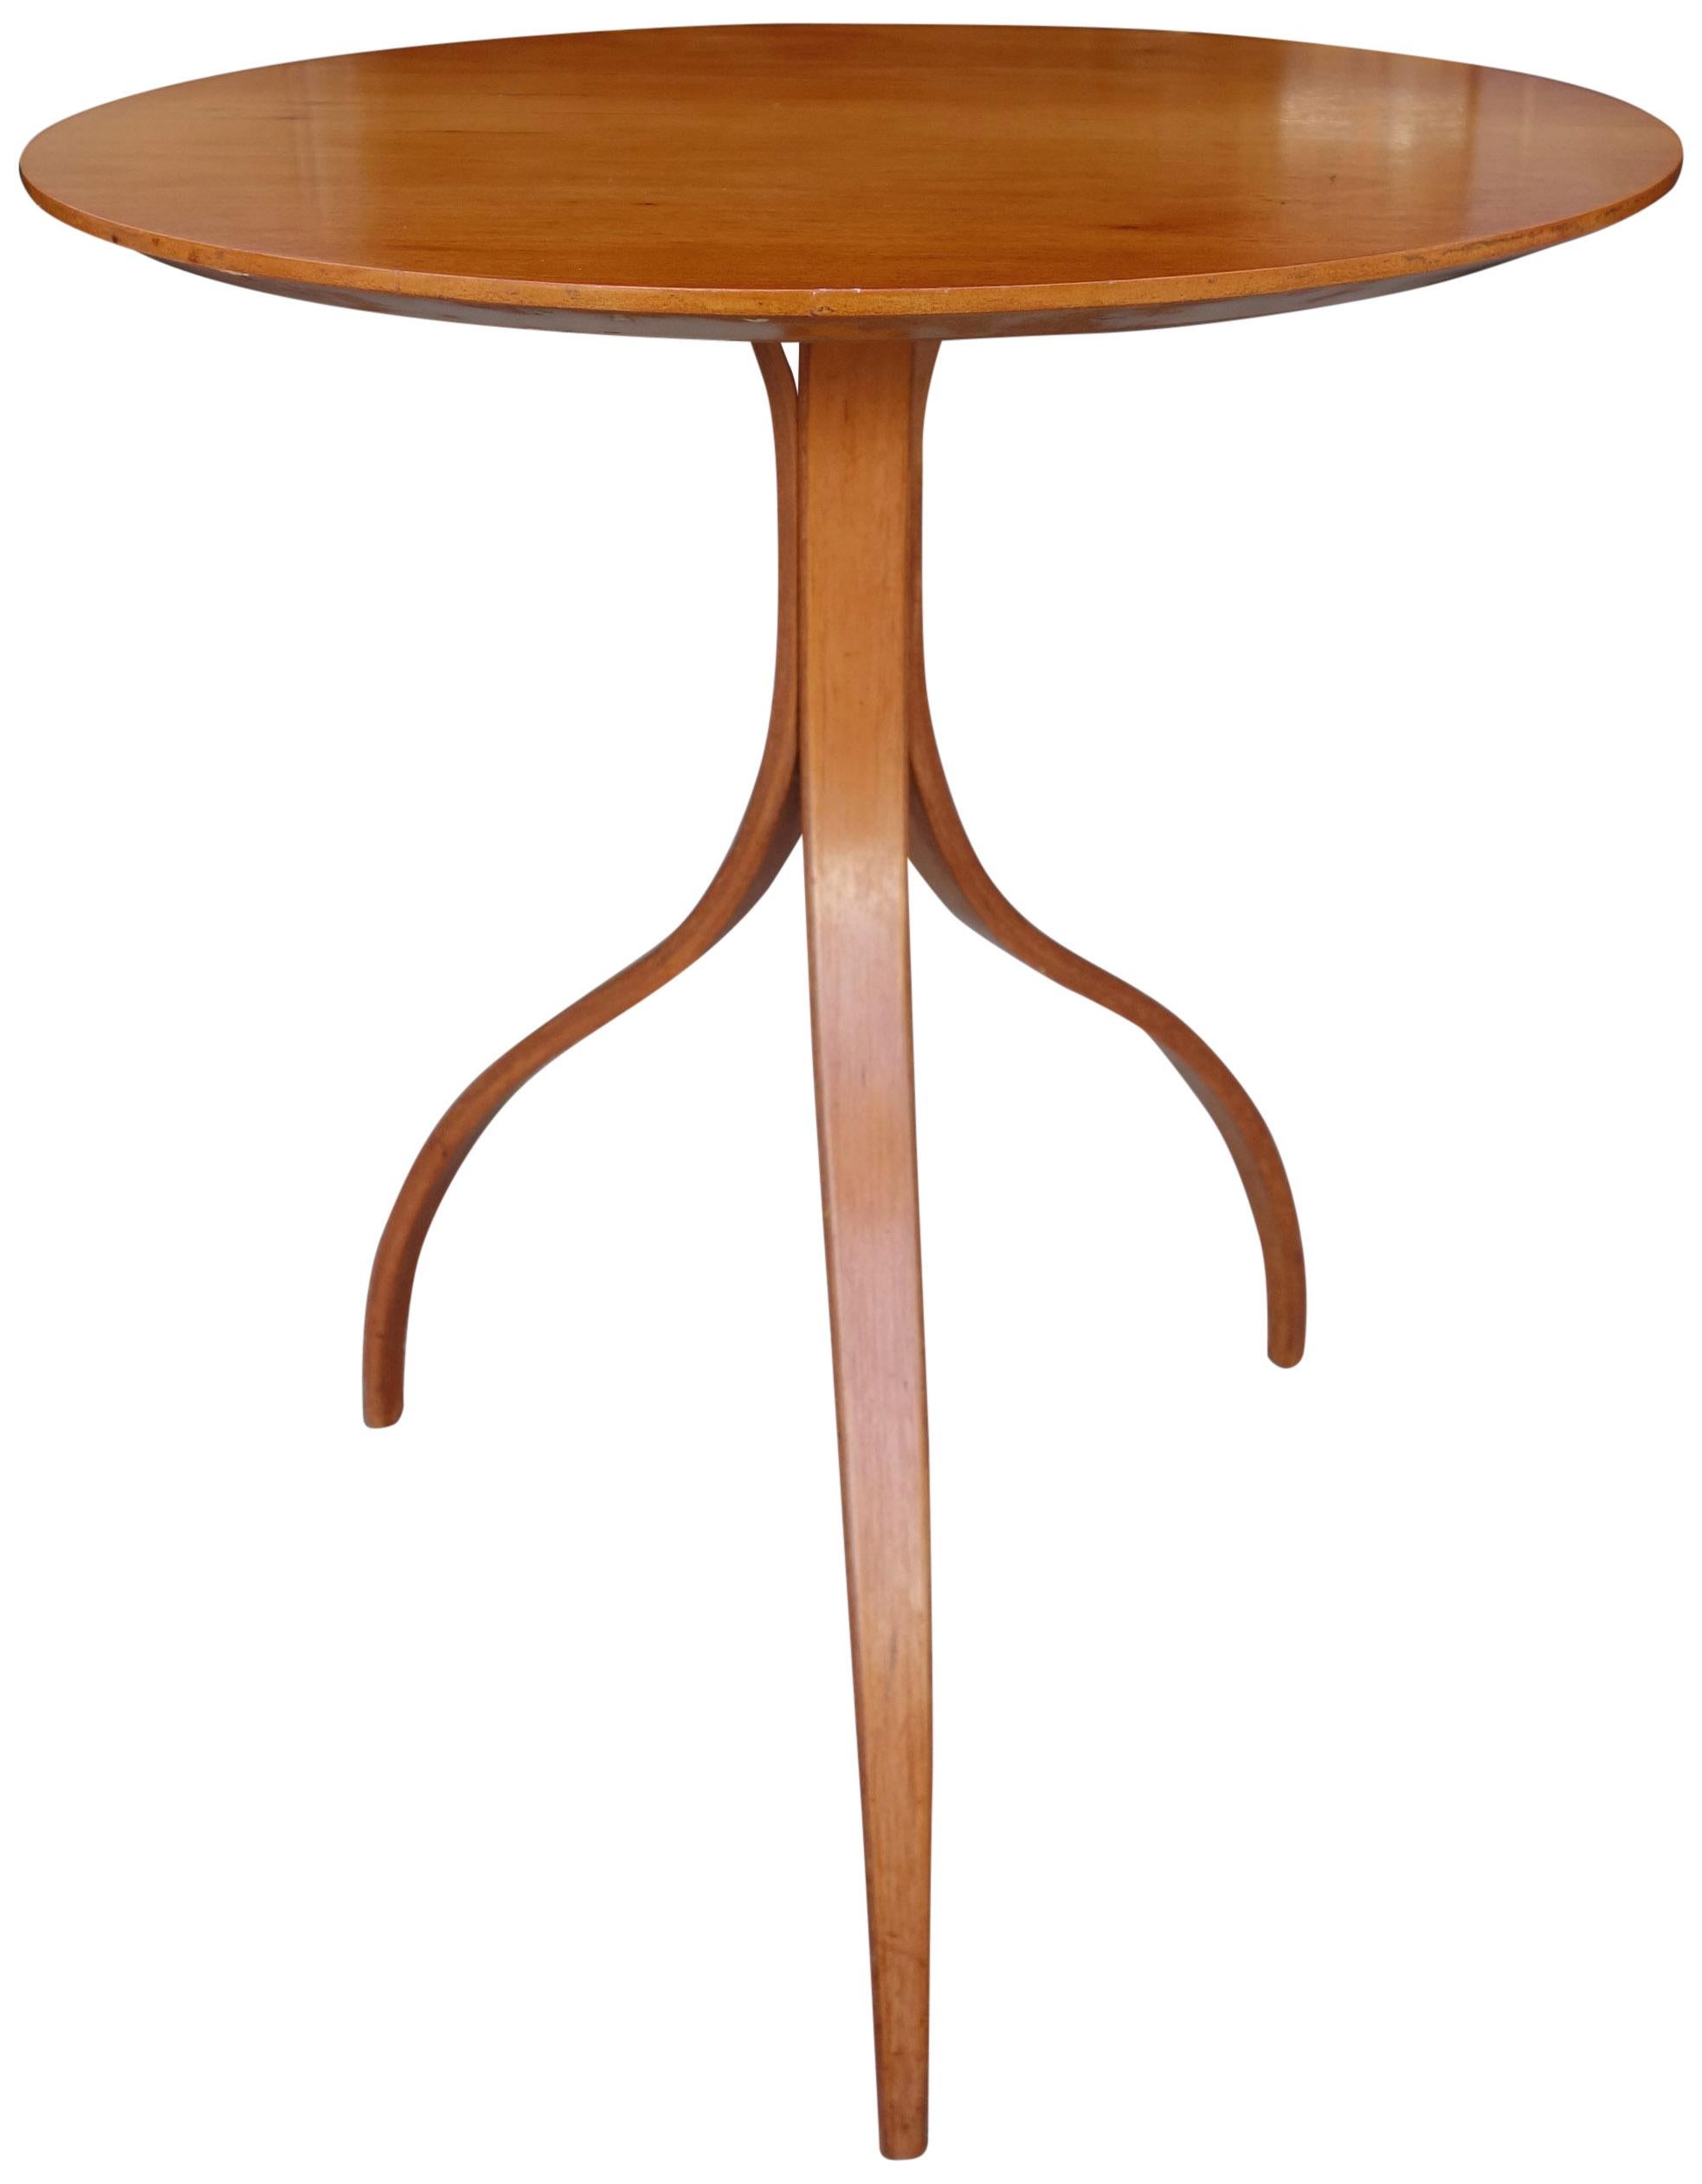 For your consideration is this beautiful and elegant three legged table in teakwood. Featuring a bentwood design and round top in original in beautiful condition with a warm patina. Reminiscent of Dunbar Wormley designs.

The top is 20 inches wide